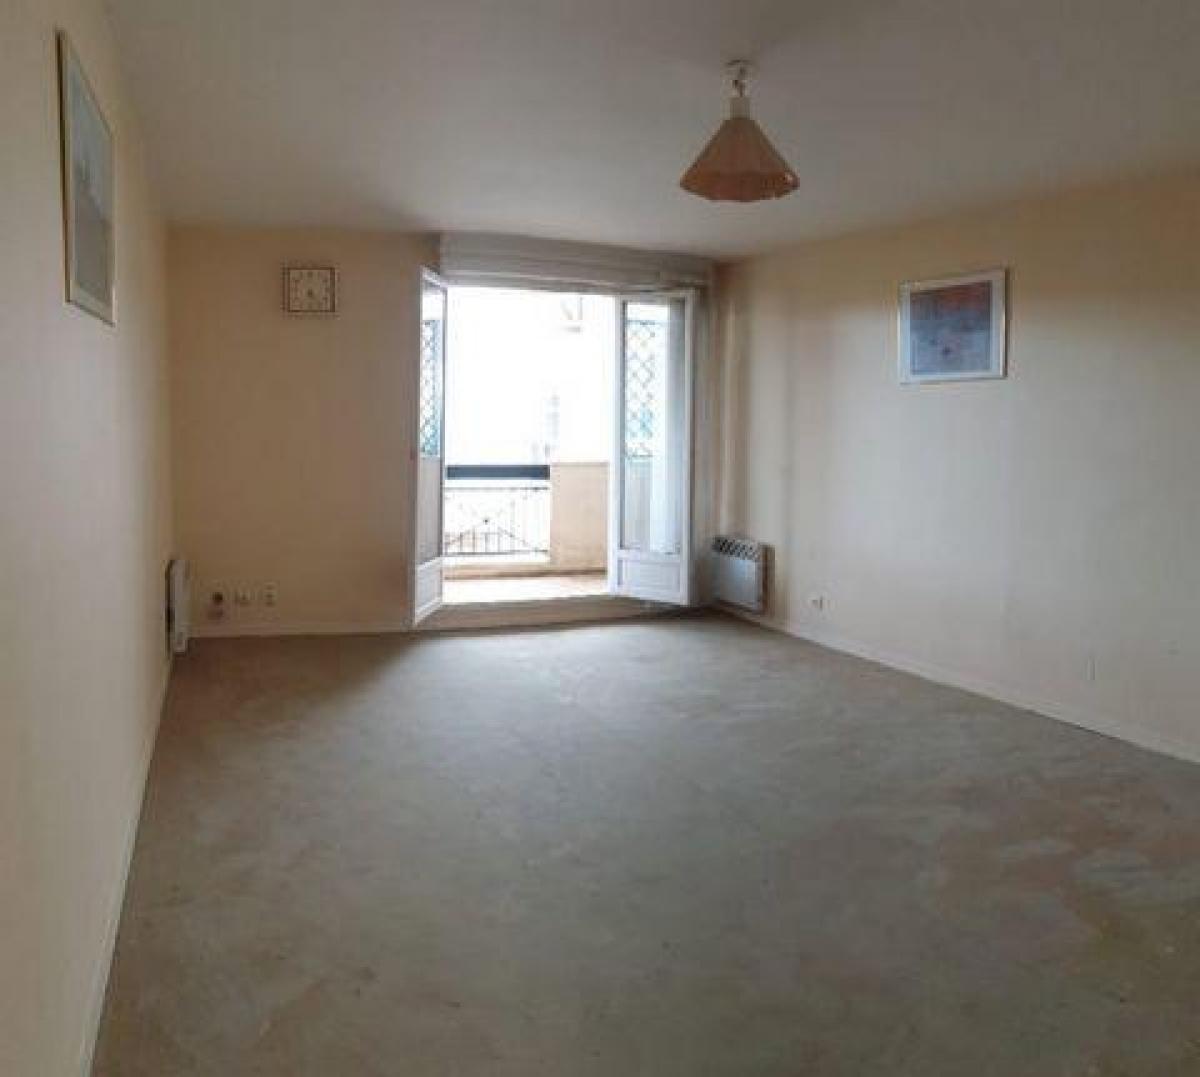 Picture of Apartment For Sale in Gif-sur-Yvette, Centre, France